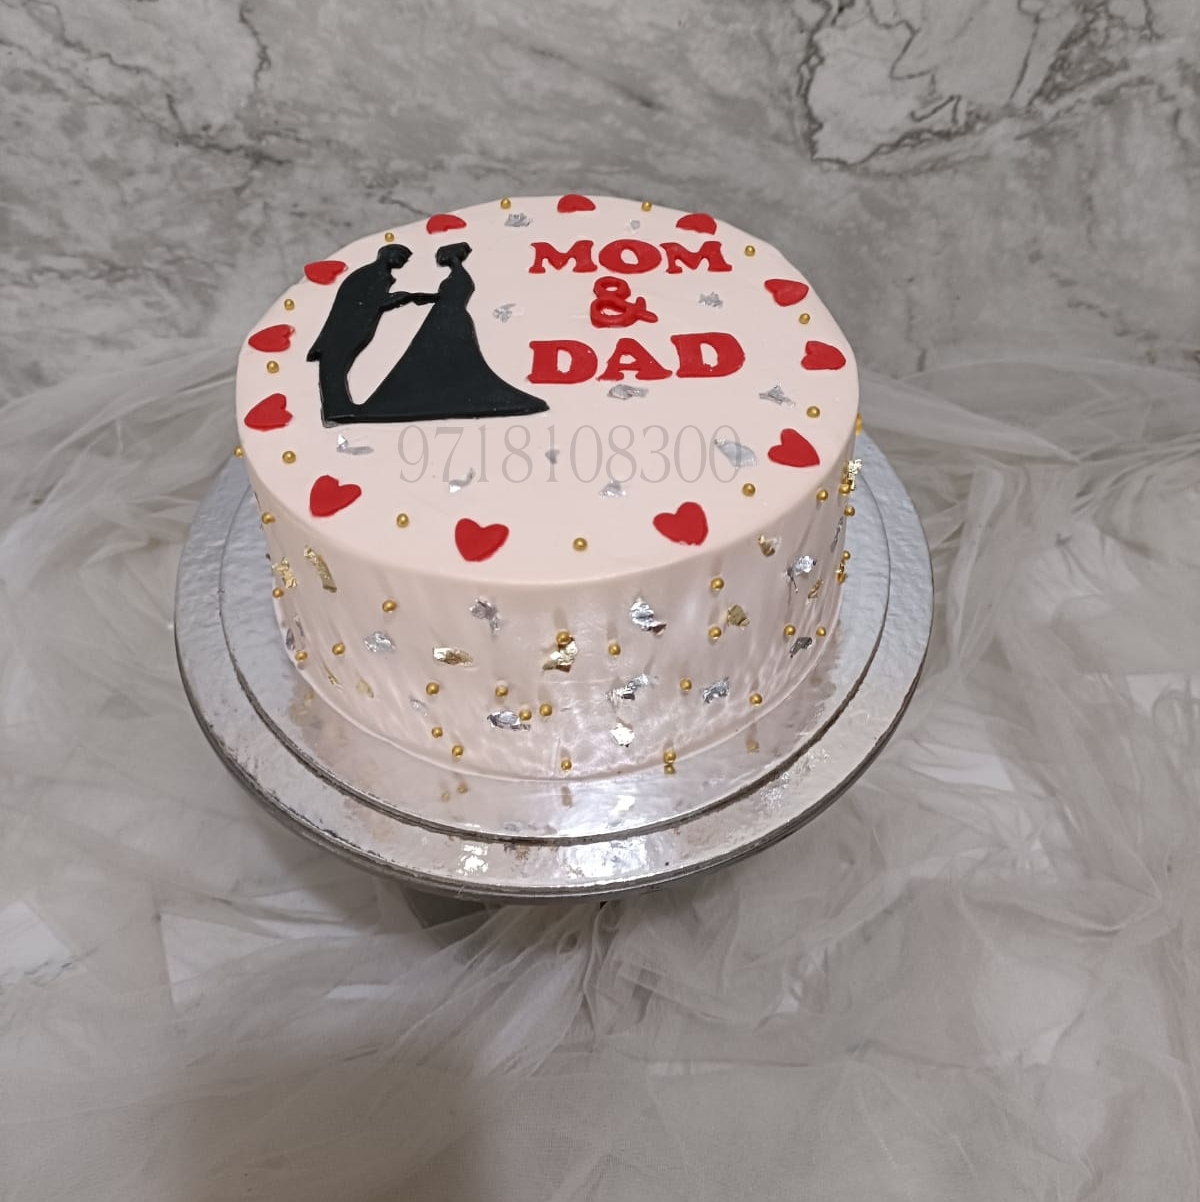 Anniversary Cake For Mom and Dad @499/- | Free Delivery | Bakingo